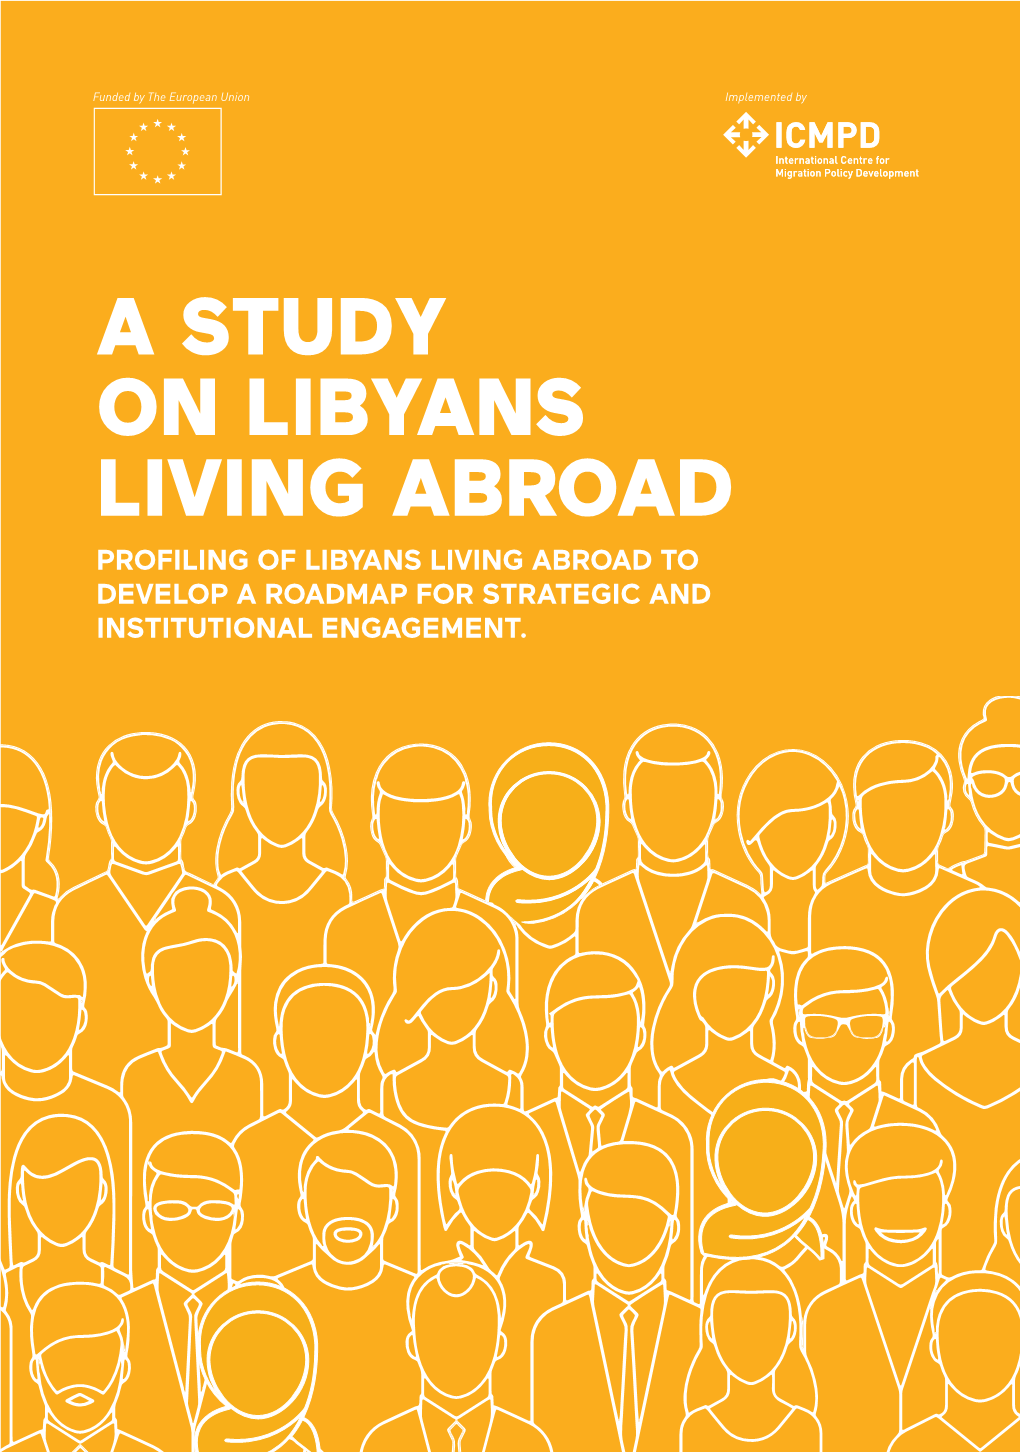 A Study on Libyans Living Abroad Profiling of Libyans Living Abroad to Develop a Roadmap for Strategic and Institutional Engagement